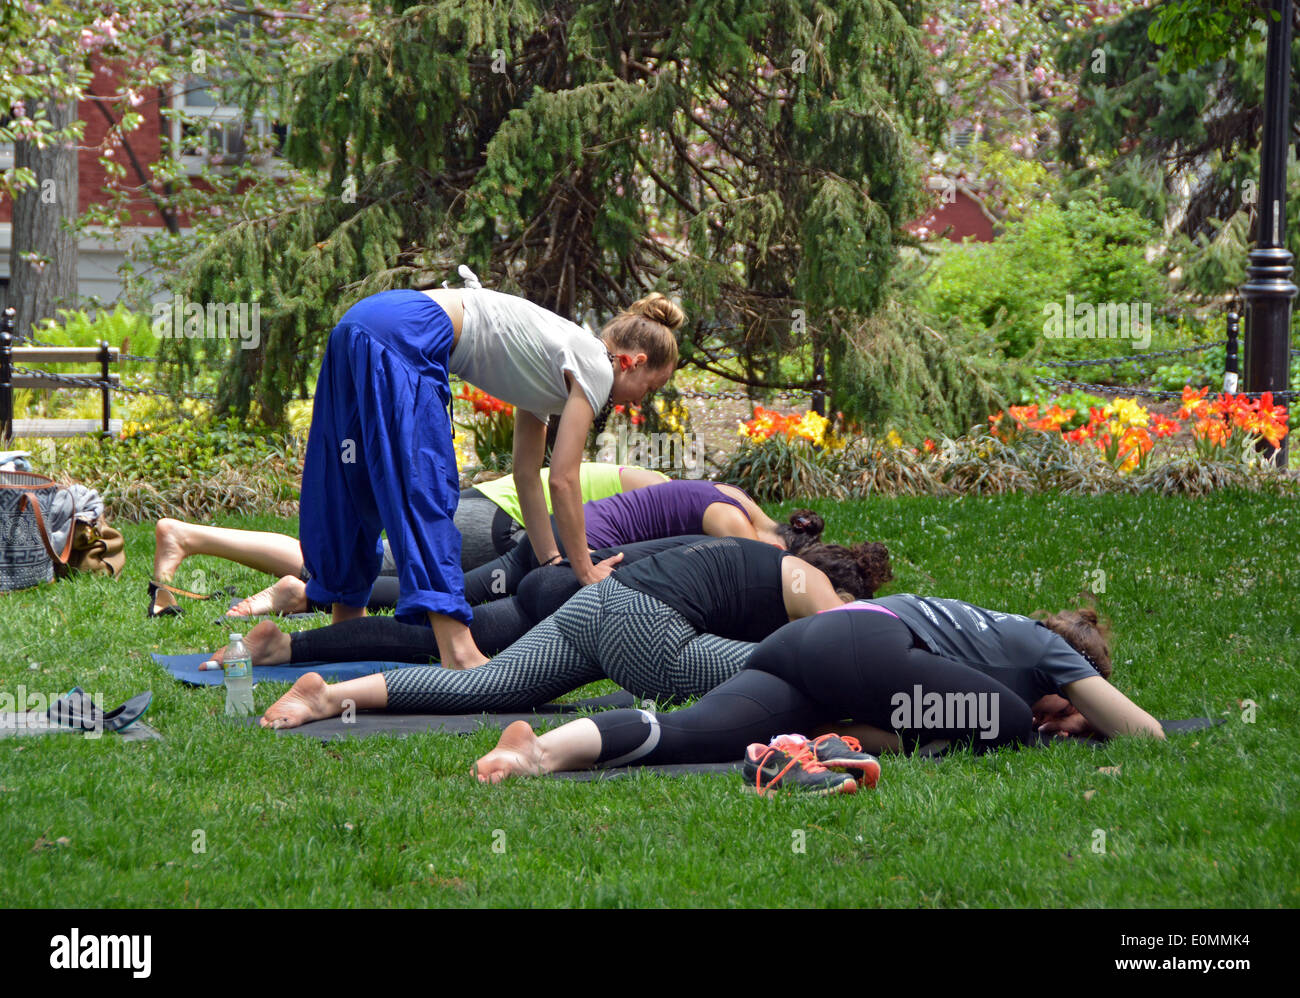 A women's outdoor yoga class in Washington Square Park in Greenwich Village, New York Stock Photo